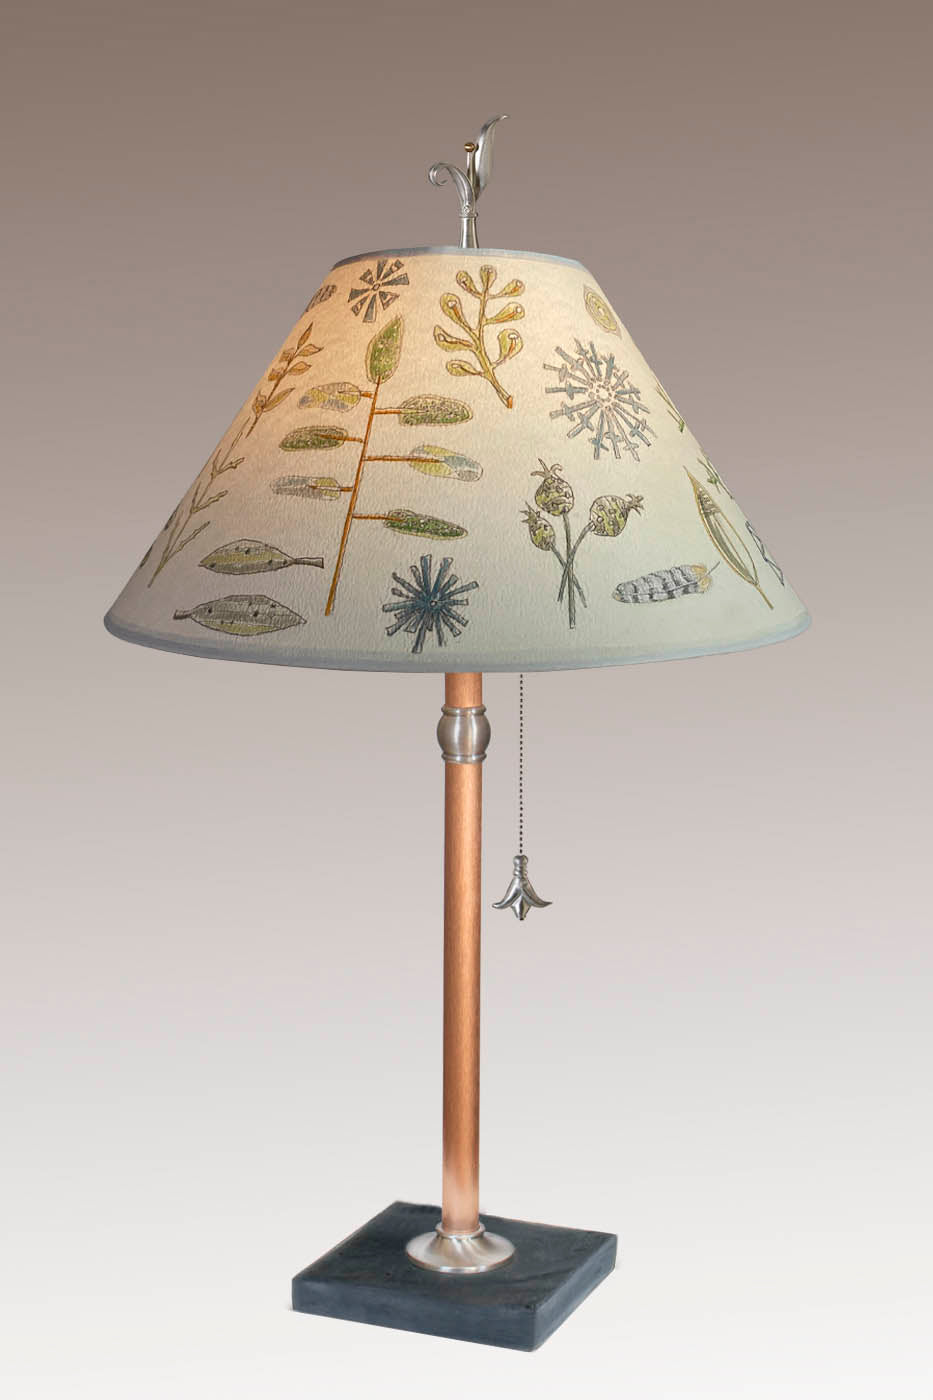 Janna Ugone & Co Table Lamp Copper Table Lamp with Large Conical Shade in Field Chart